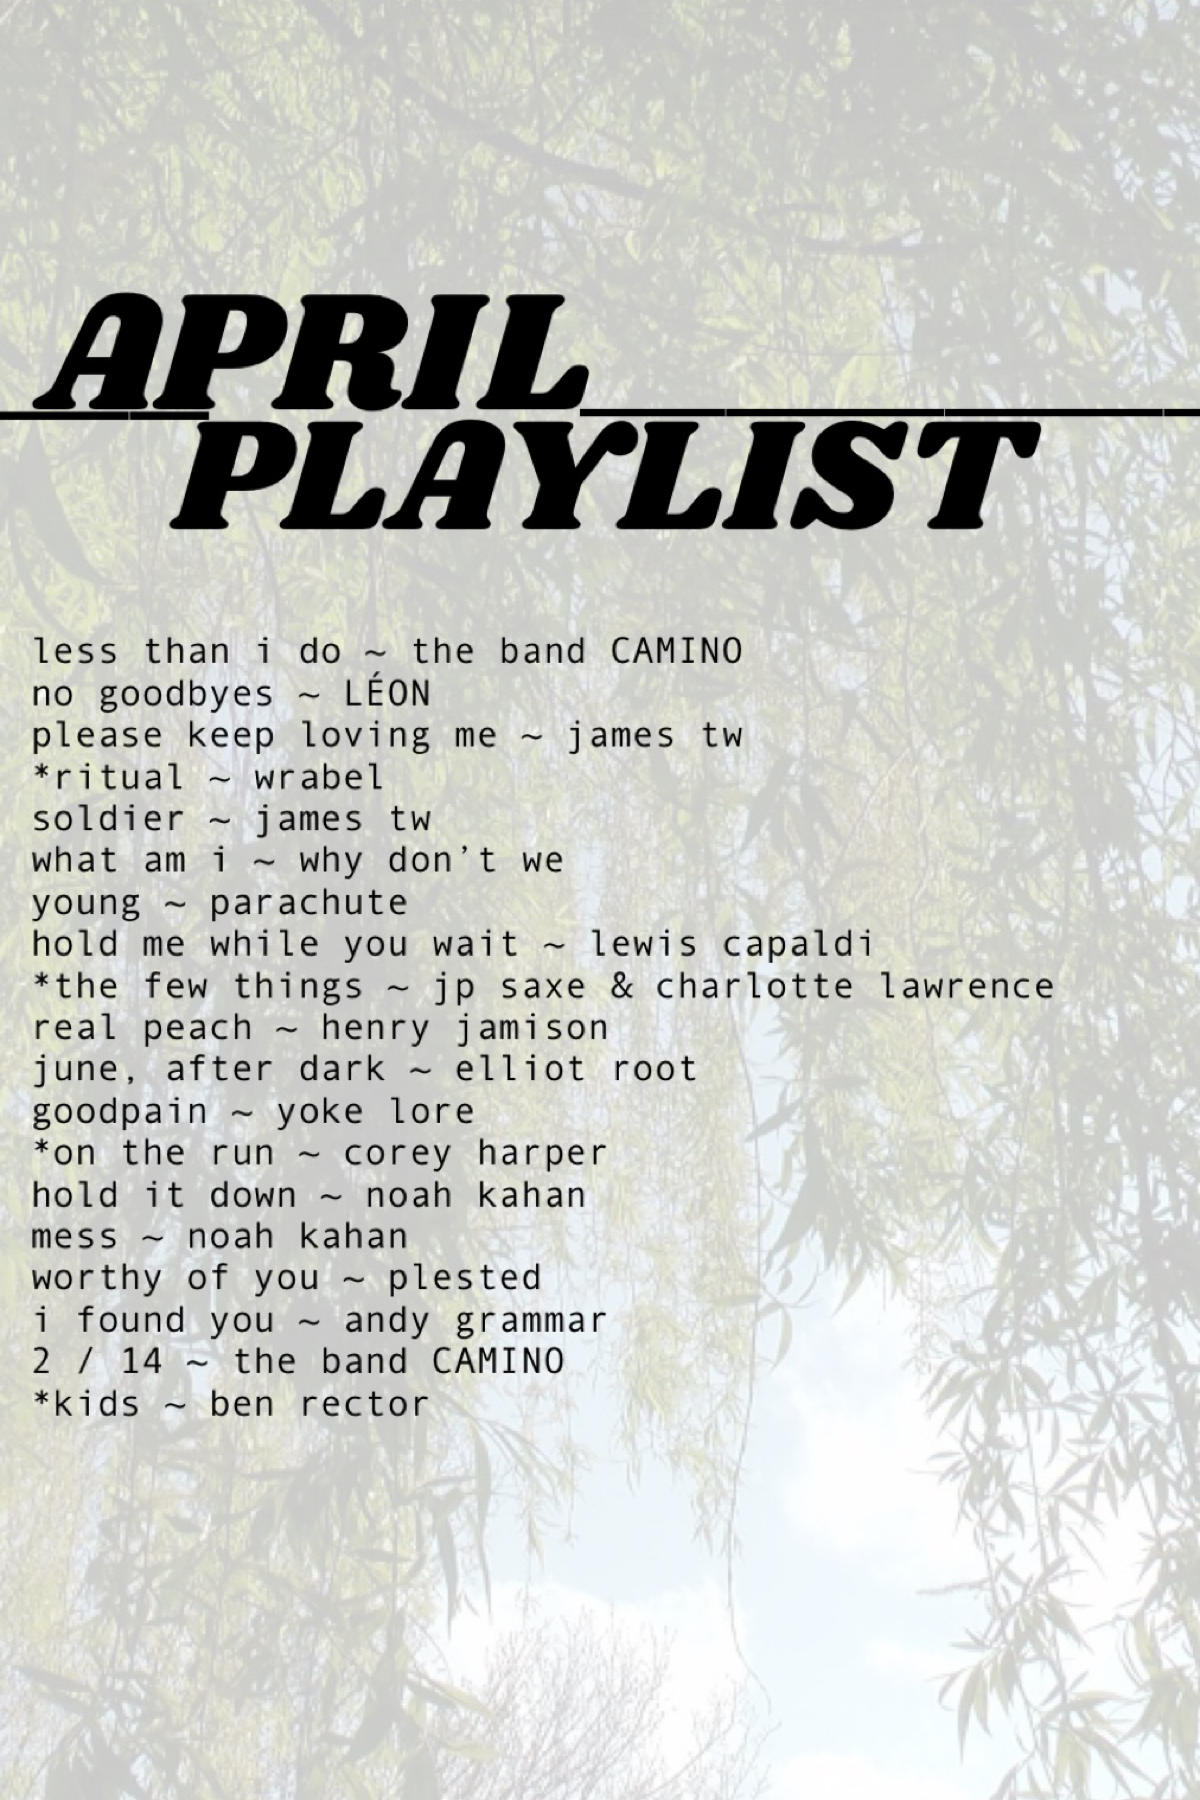 hey guys it’s bella and this is my playlist for april! 💞💞